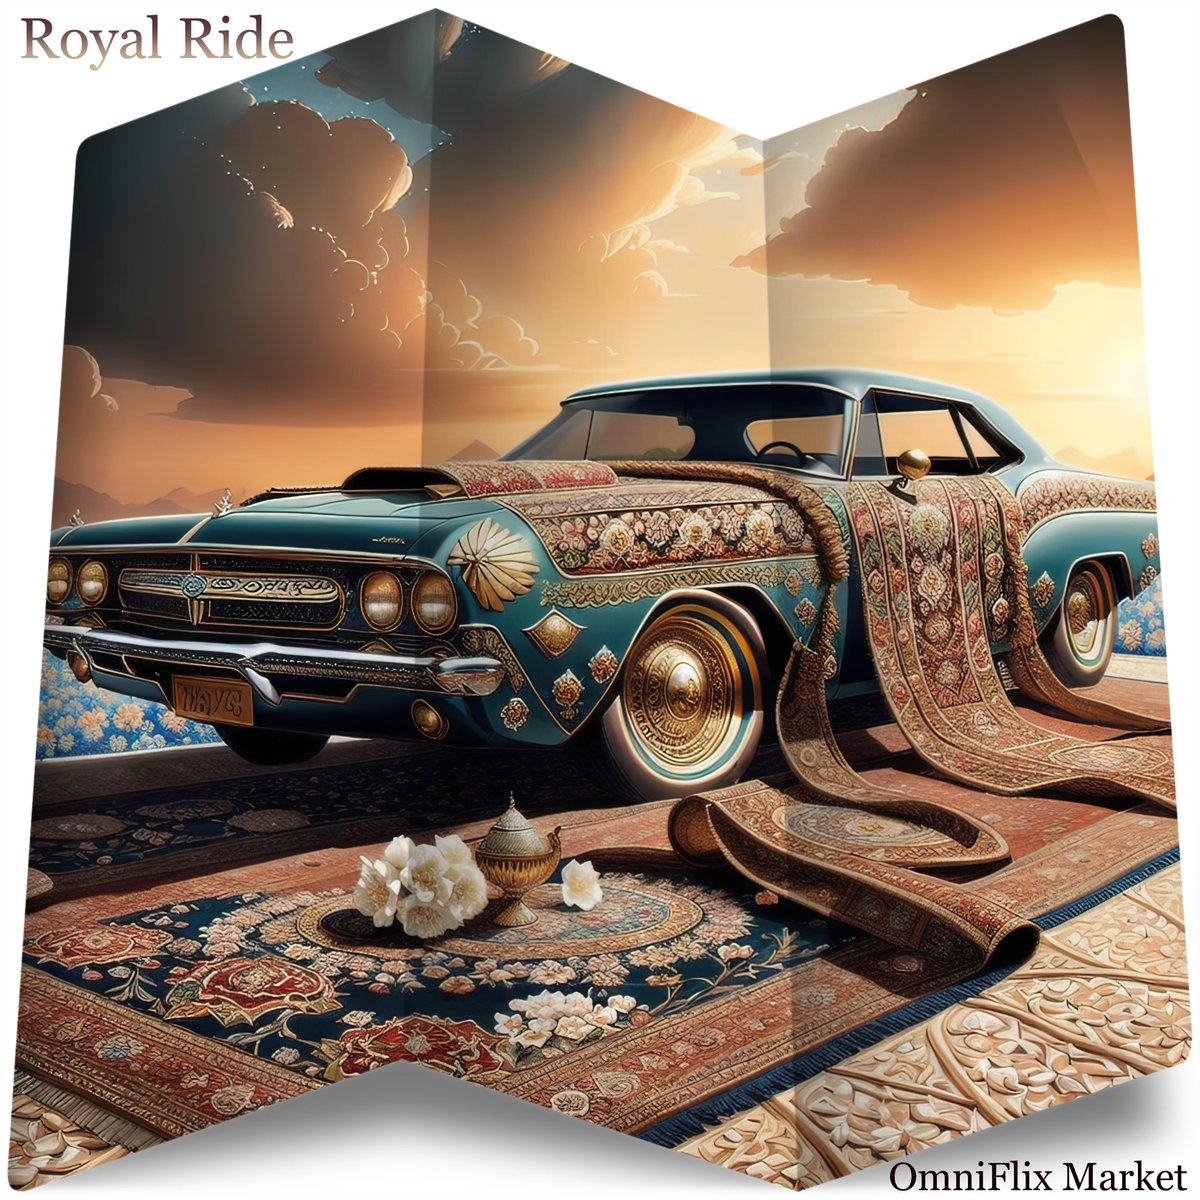 We love cars 🚘
We love textile arts 🧵
We have a new collaboration for you with @sepidehsahebdel  
🗞️👉 special thank you 🎁 for anyone who collects a Royal Ride 👑 on @OmniFlixNetwork 
#thechronicles $FLIX